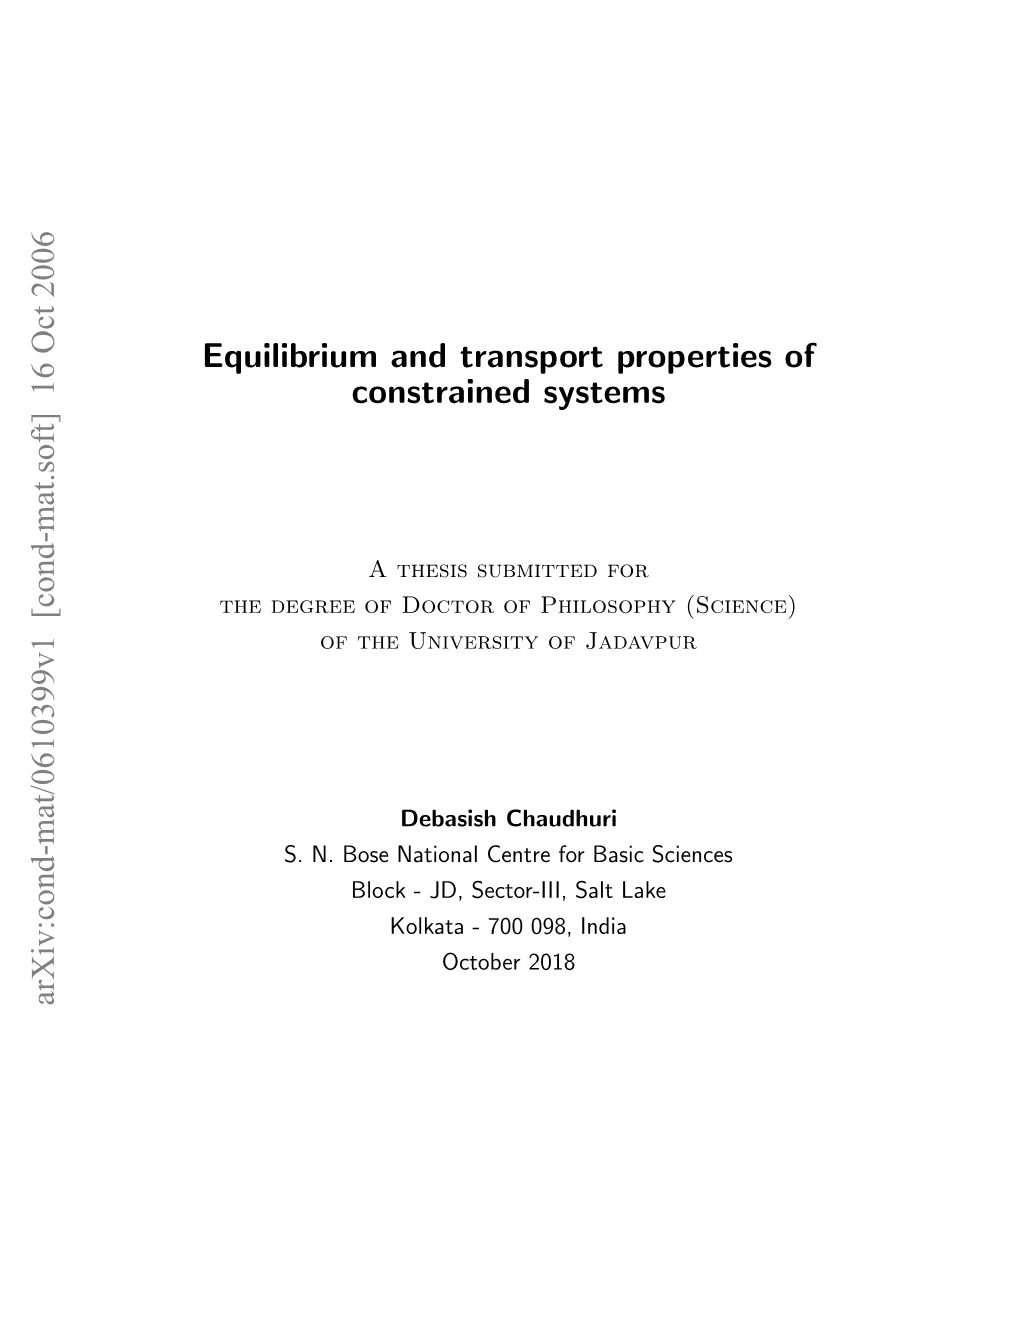 Equilibrium and Transport Properties of Constrained Systems